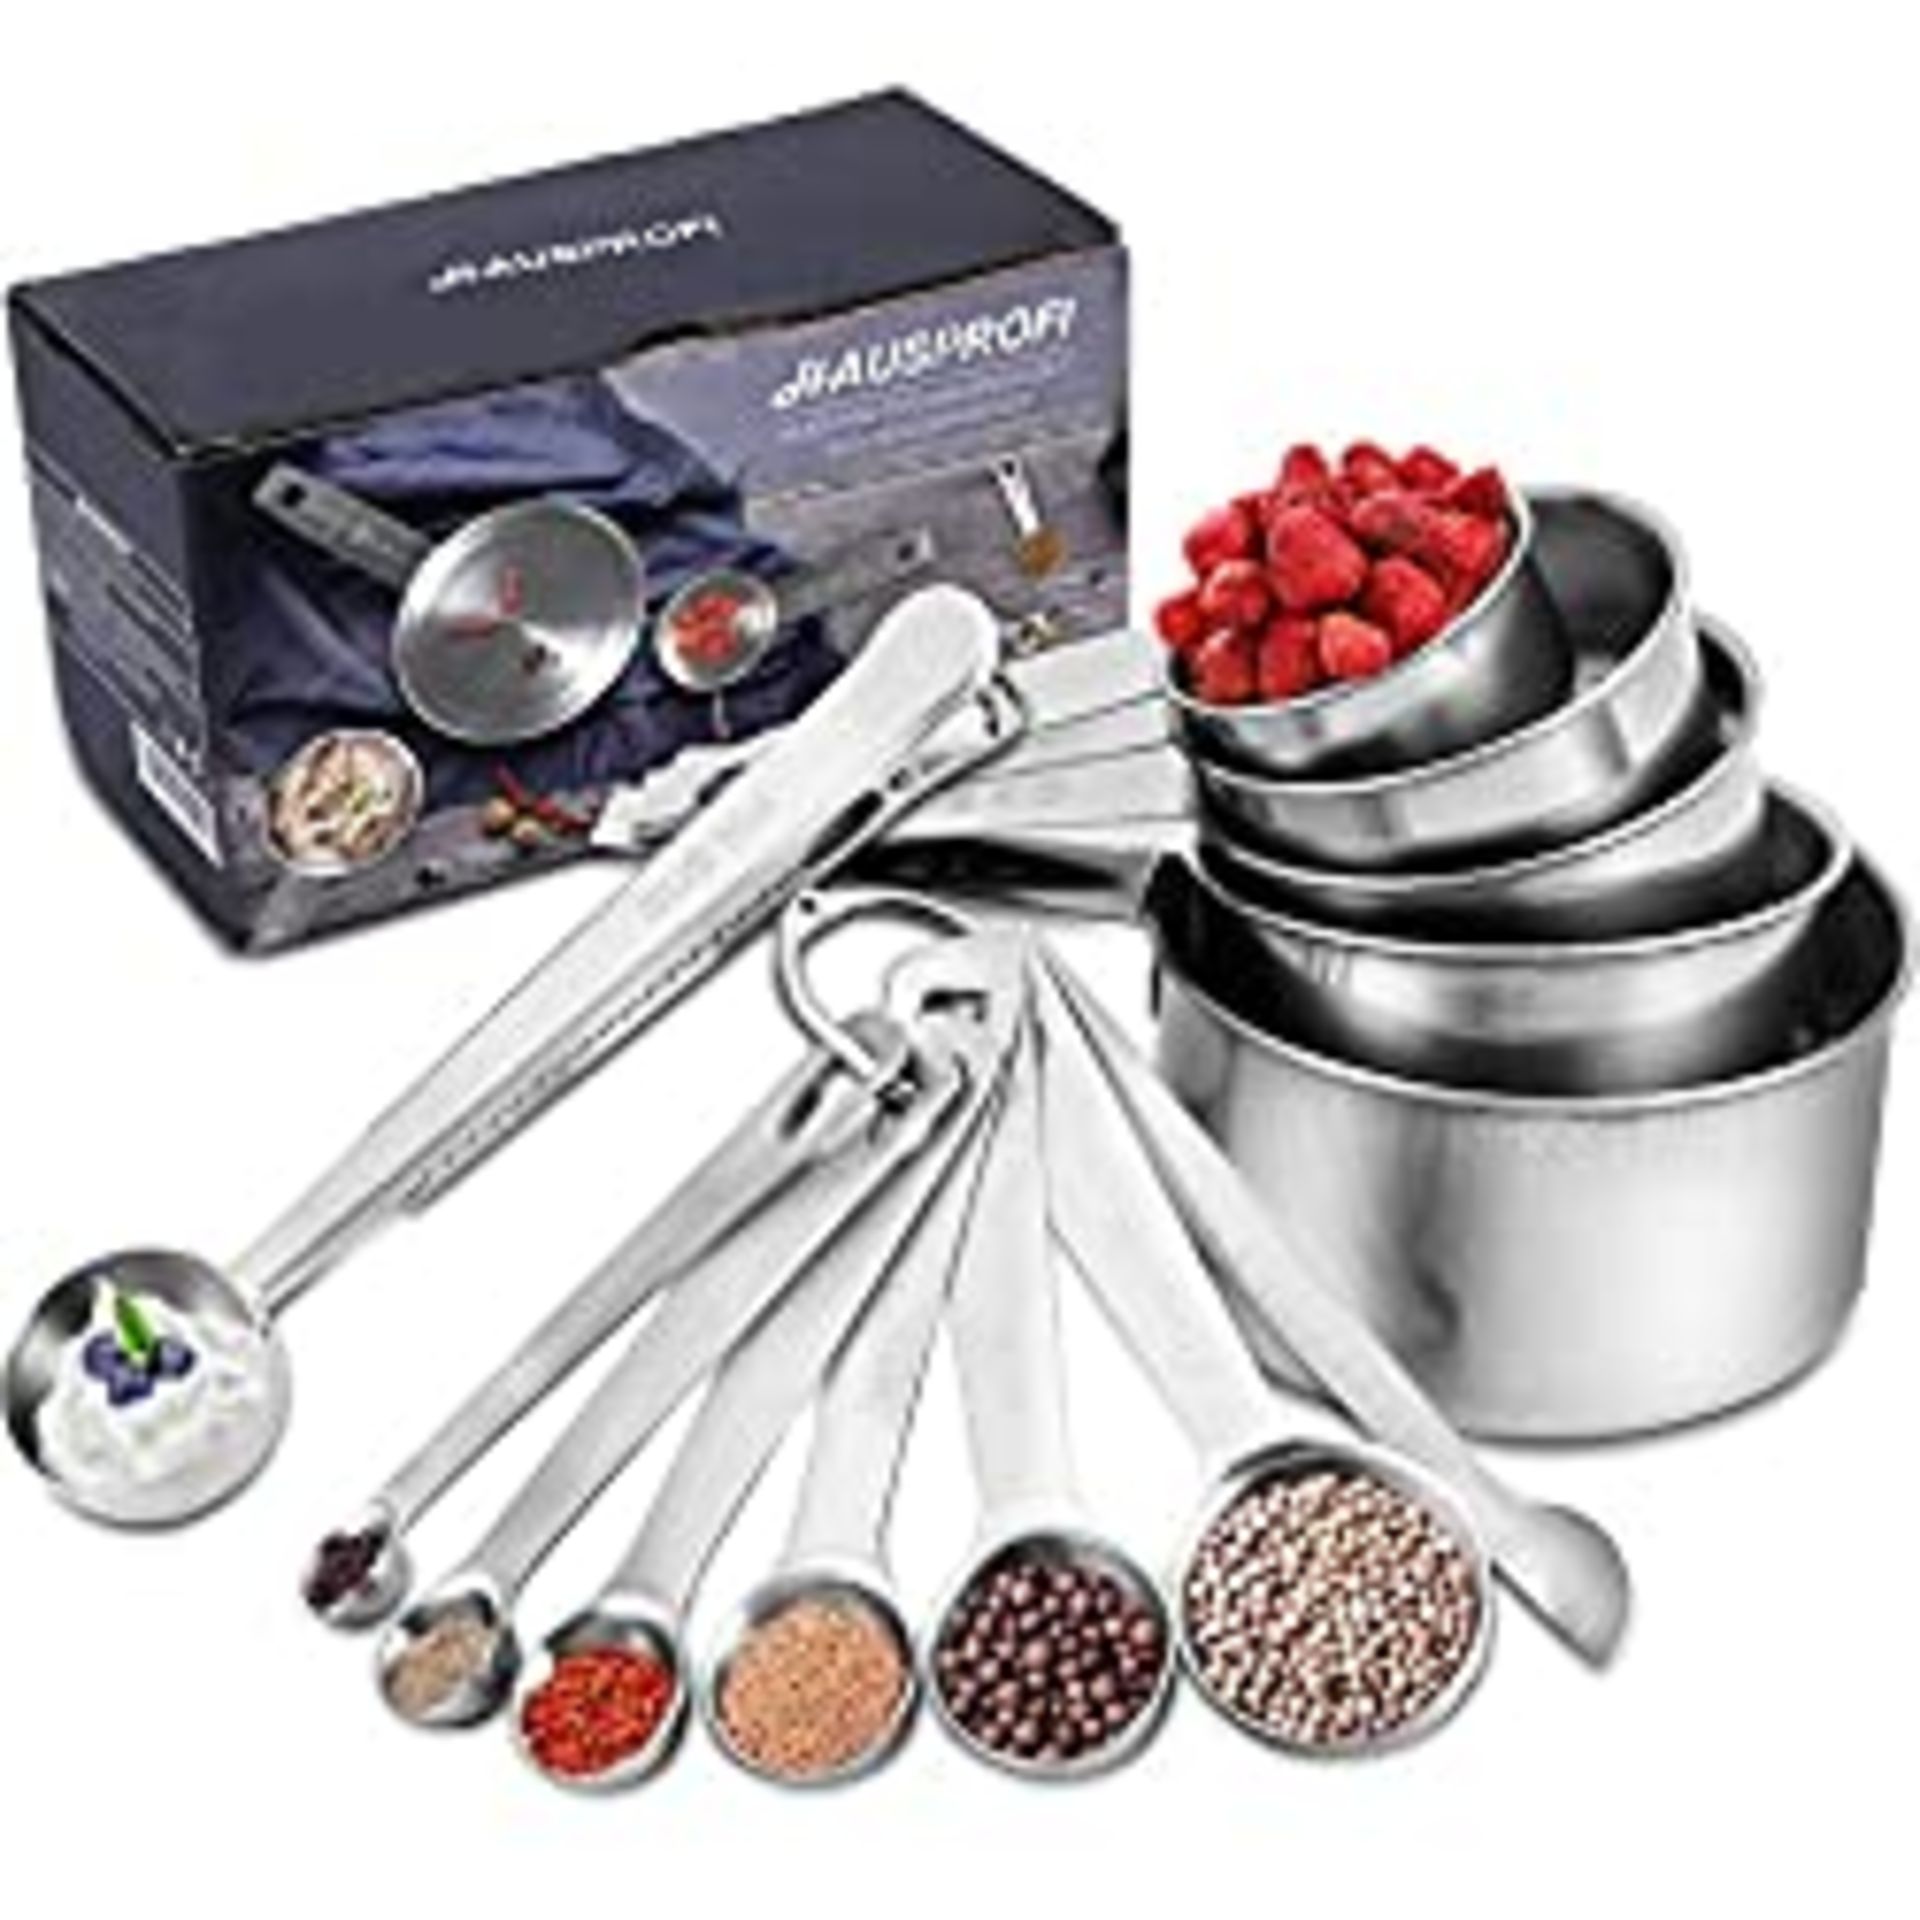 RRP £88.75 Total, Lot Consisting of 7 Items - See Description. - Image 3 of 7